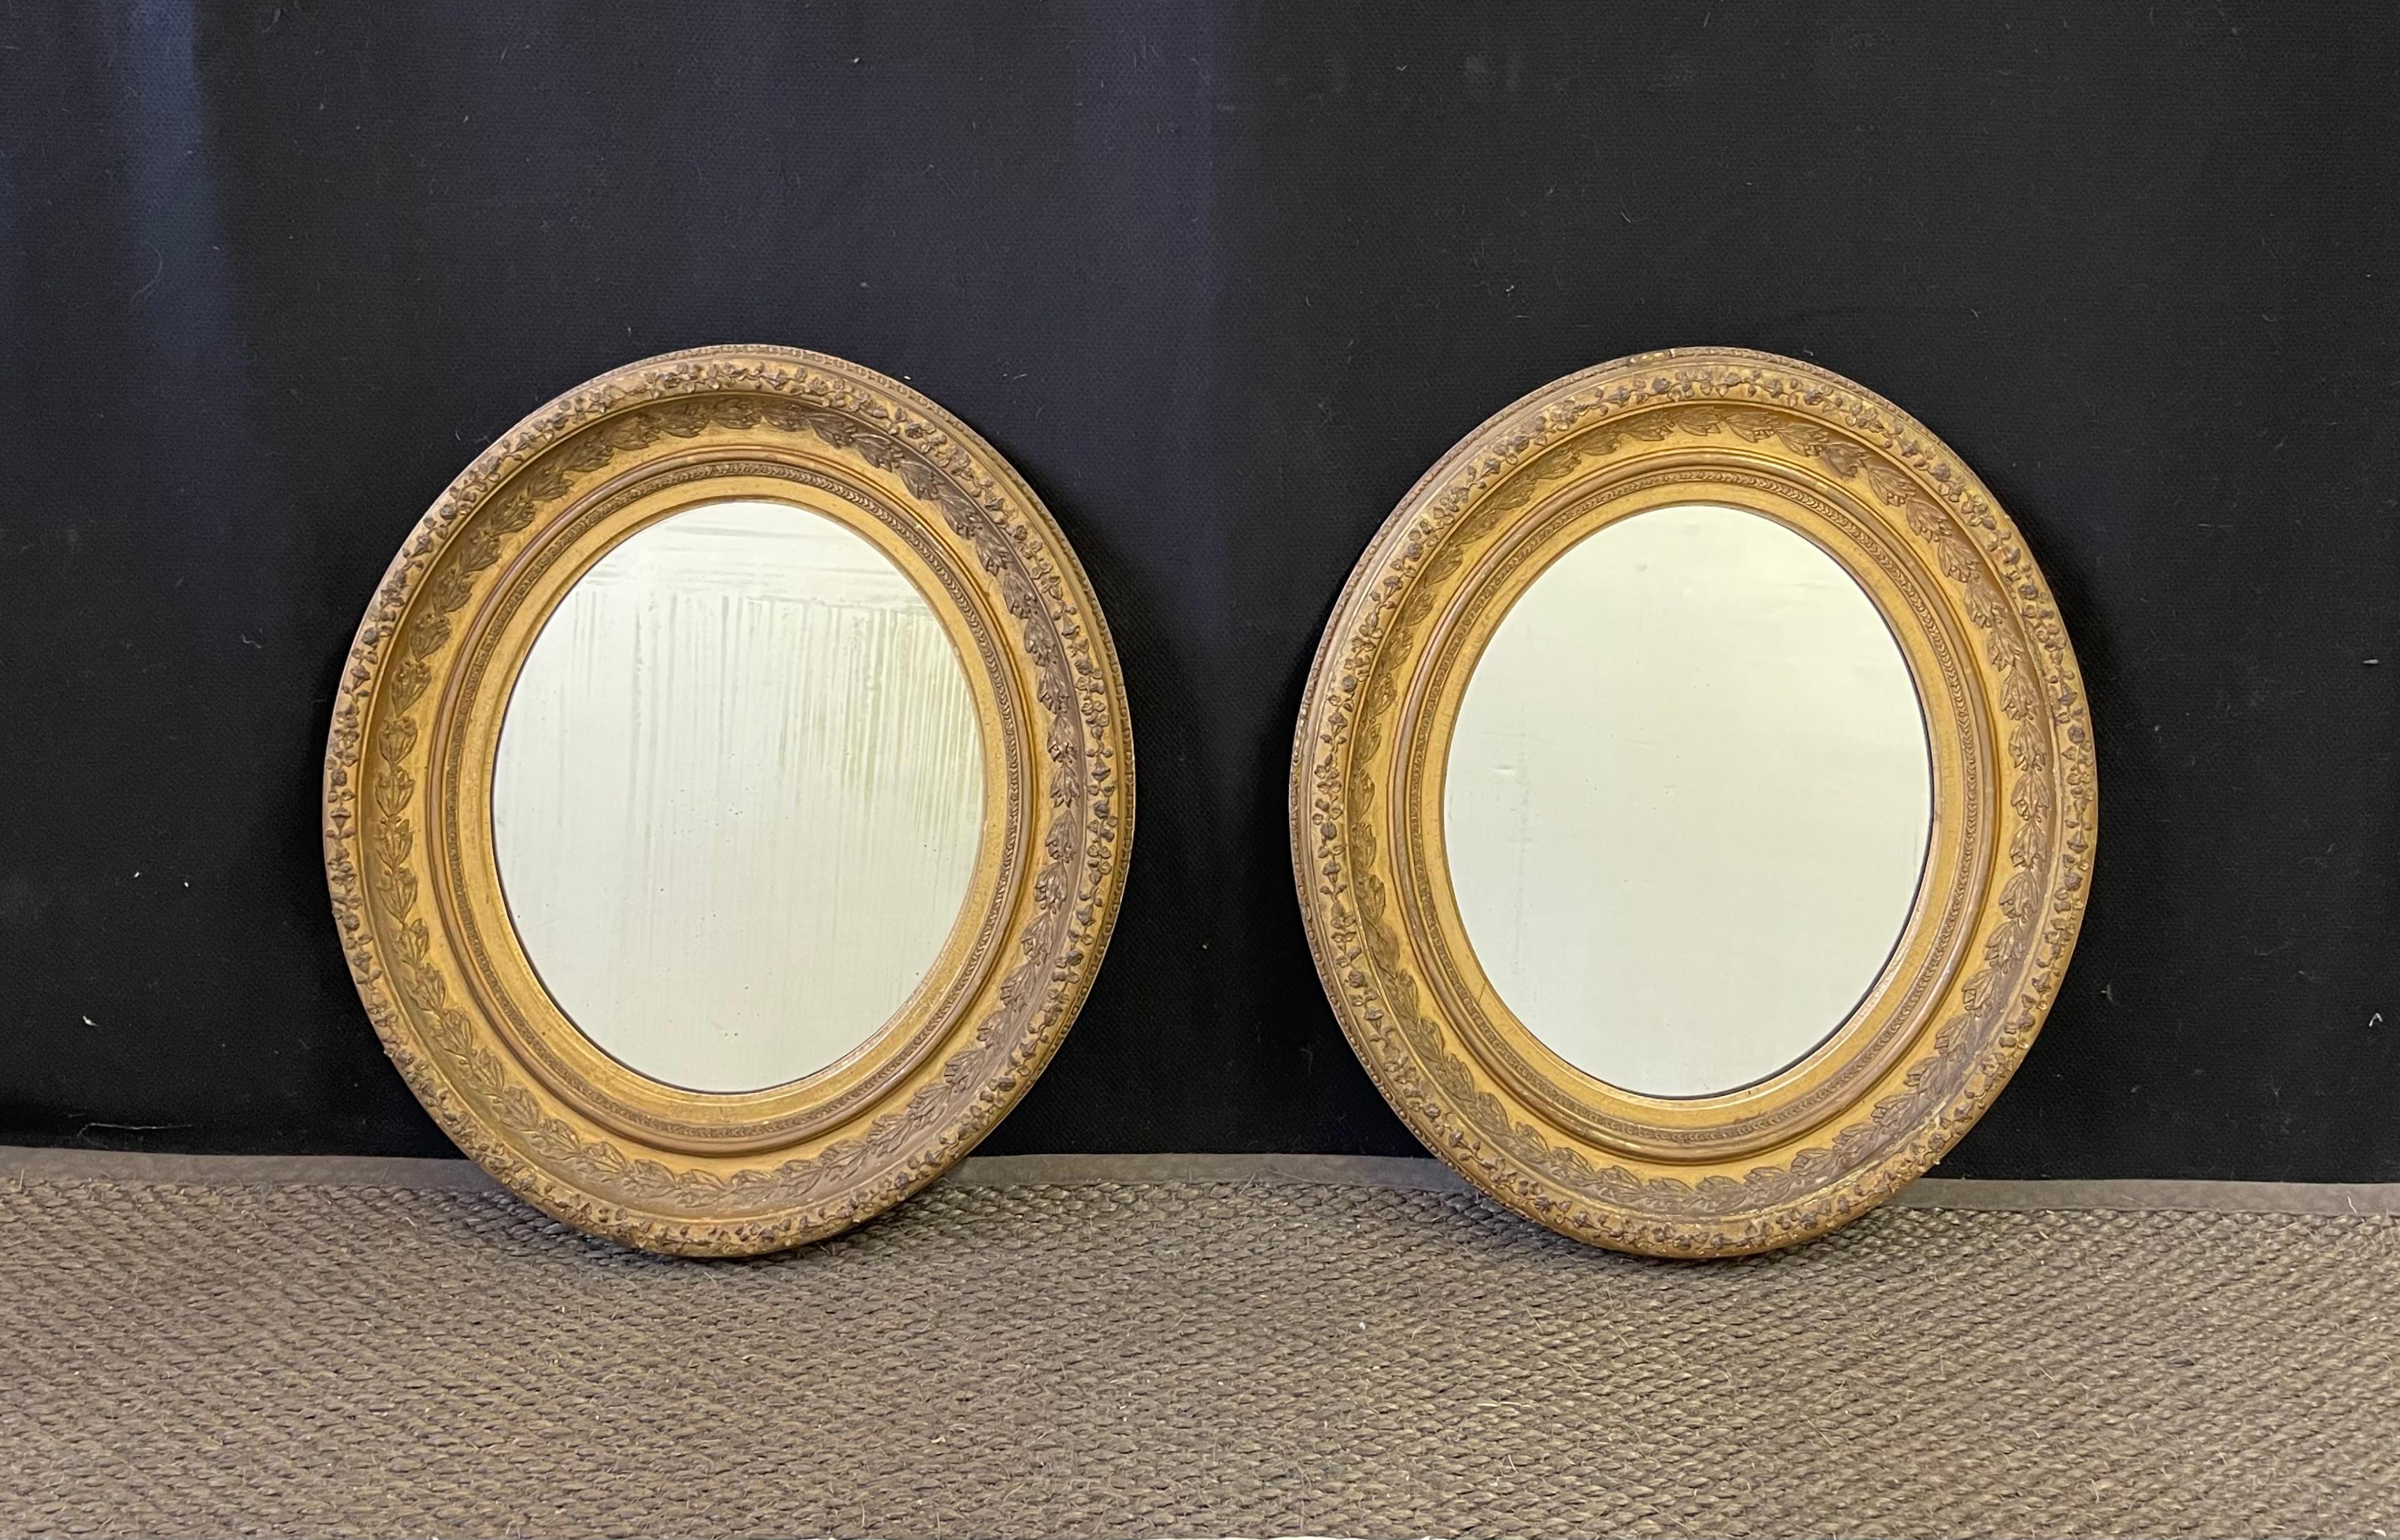 Lovely pair of 19th Century English gilt wall mirrors, oval in shape, and having bellflower, egg-and dart, and delicate floral trellis decorations on the frames. The antique mirrors are of the Victorian period and have the original glass which has